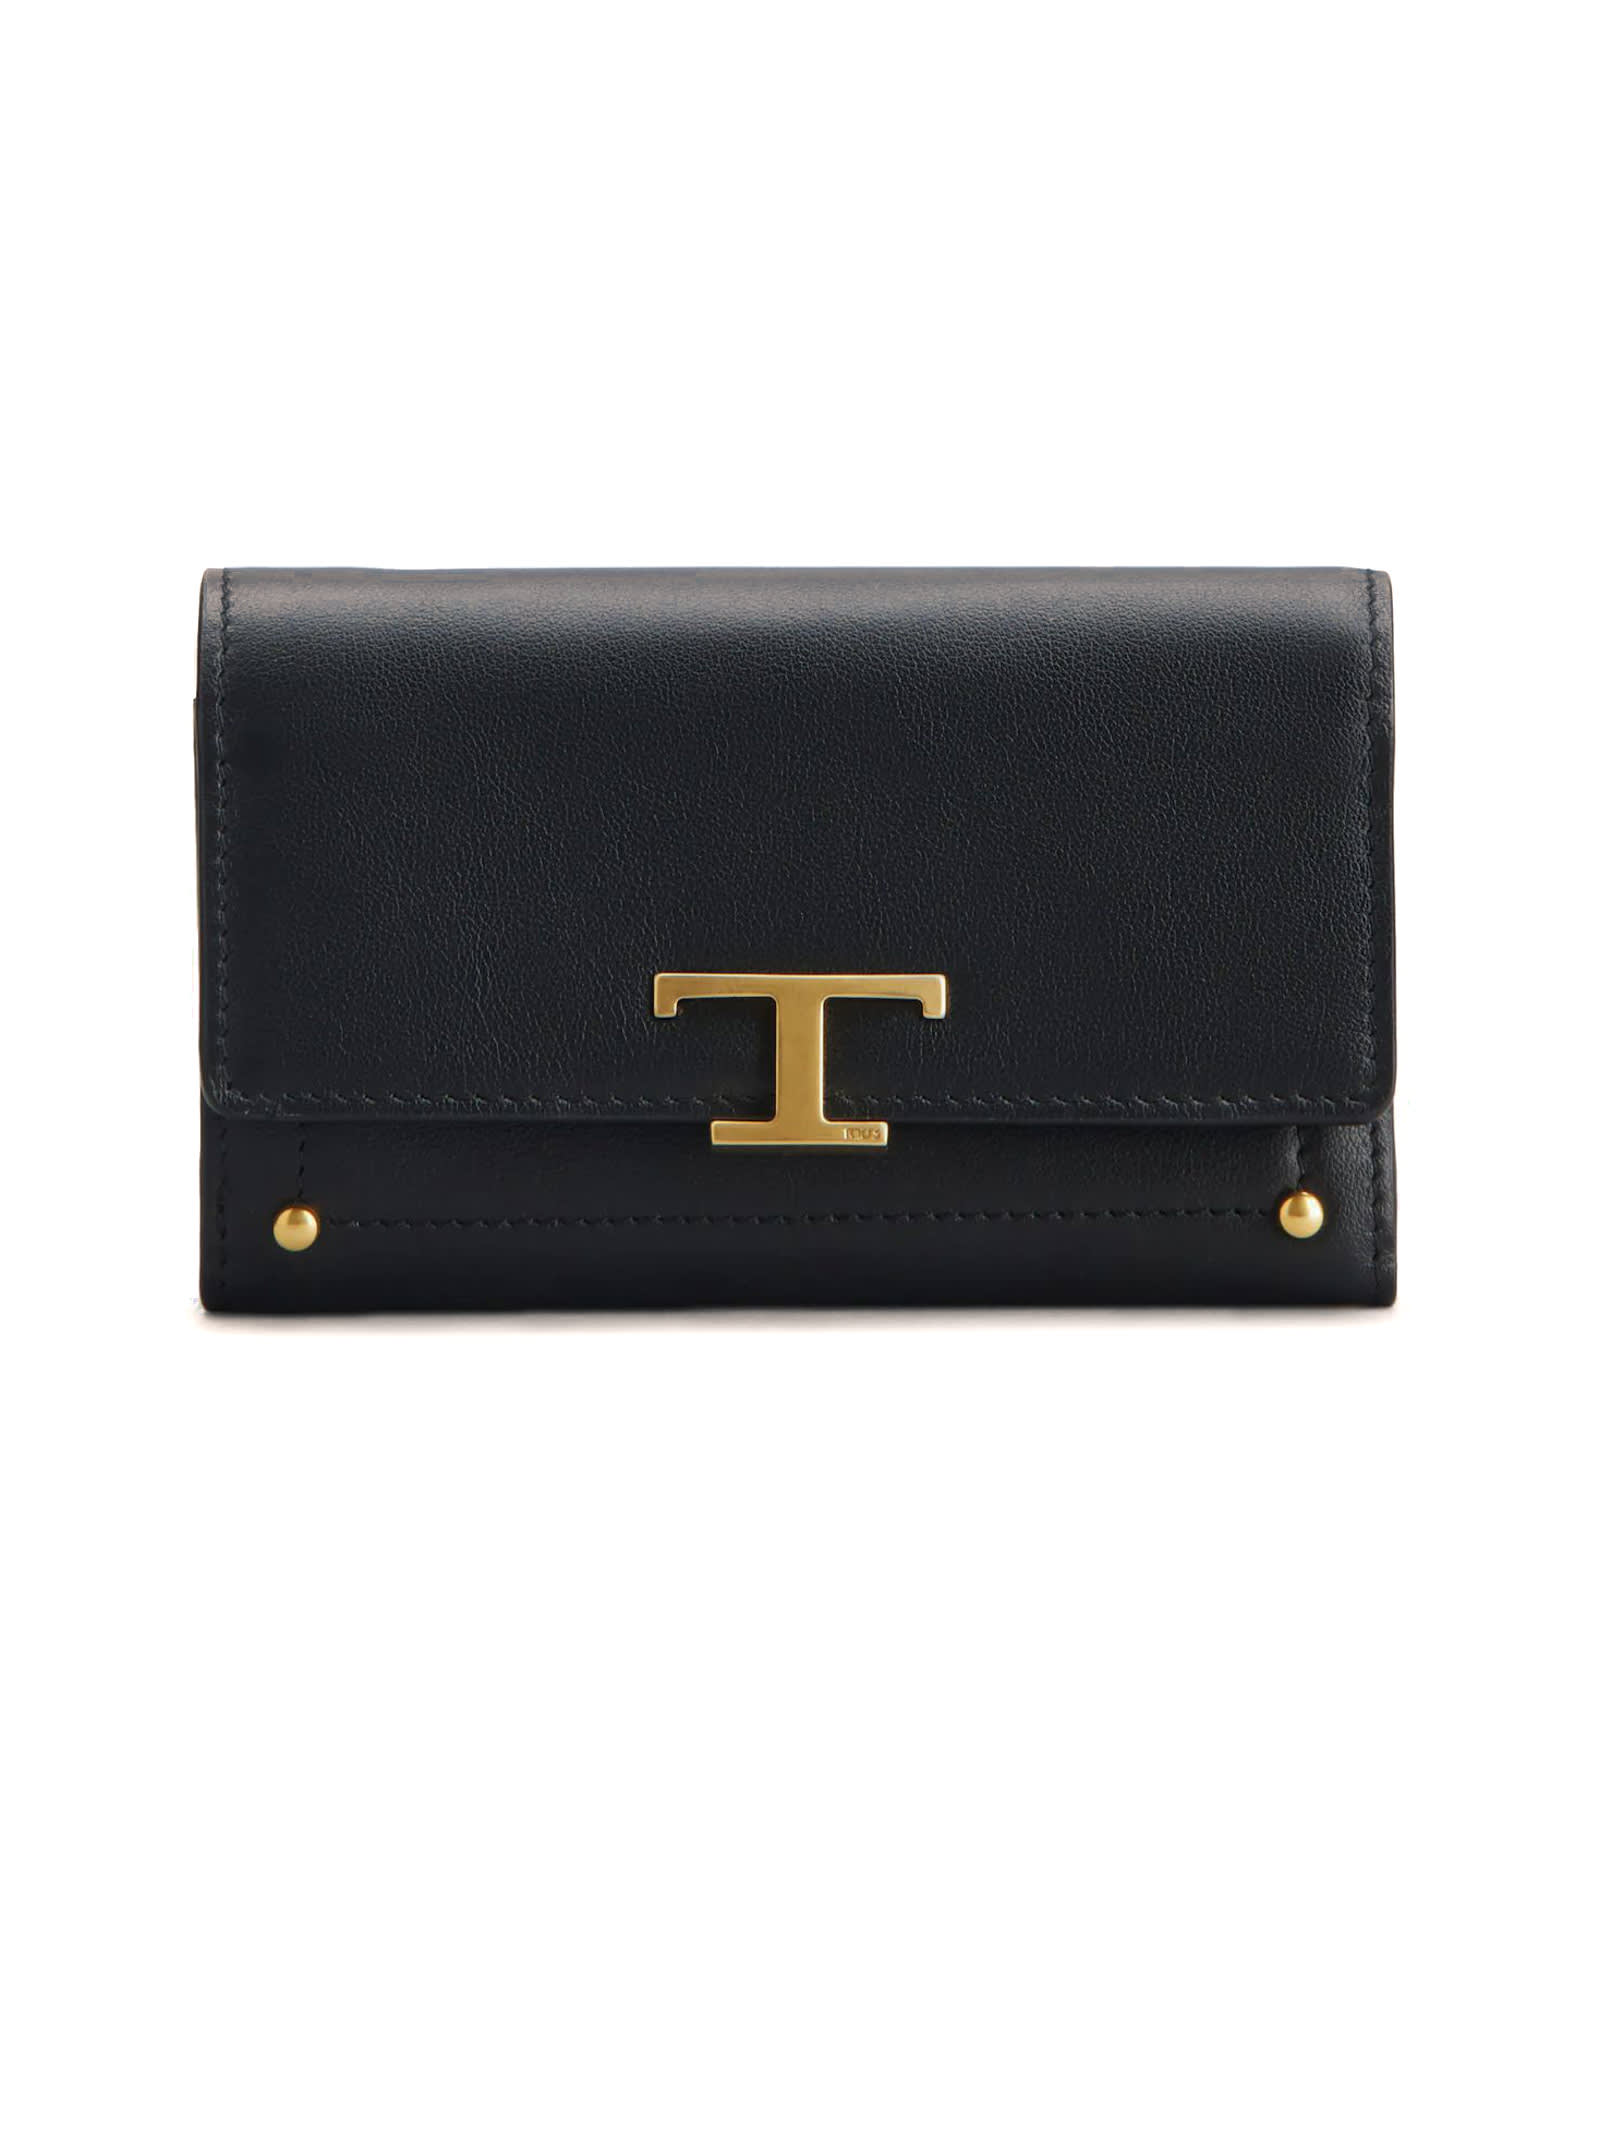 Tods Wallet In Black Leather